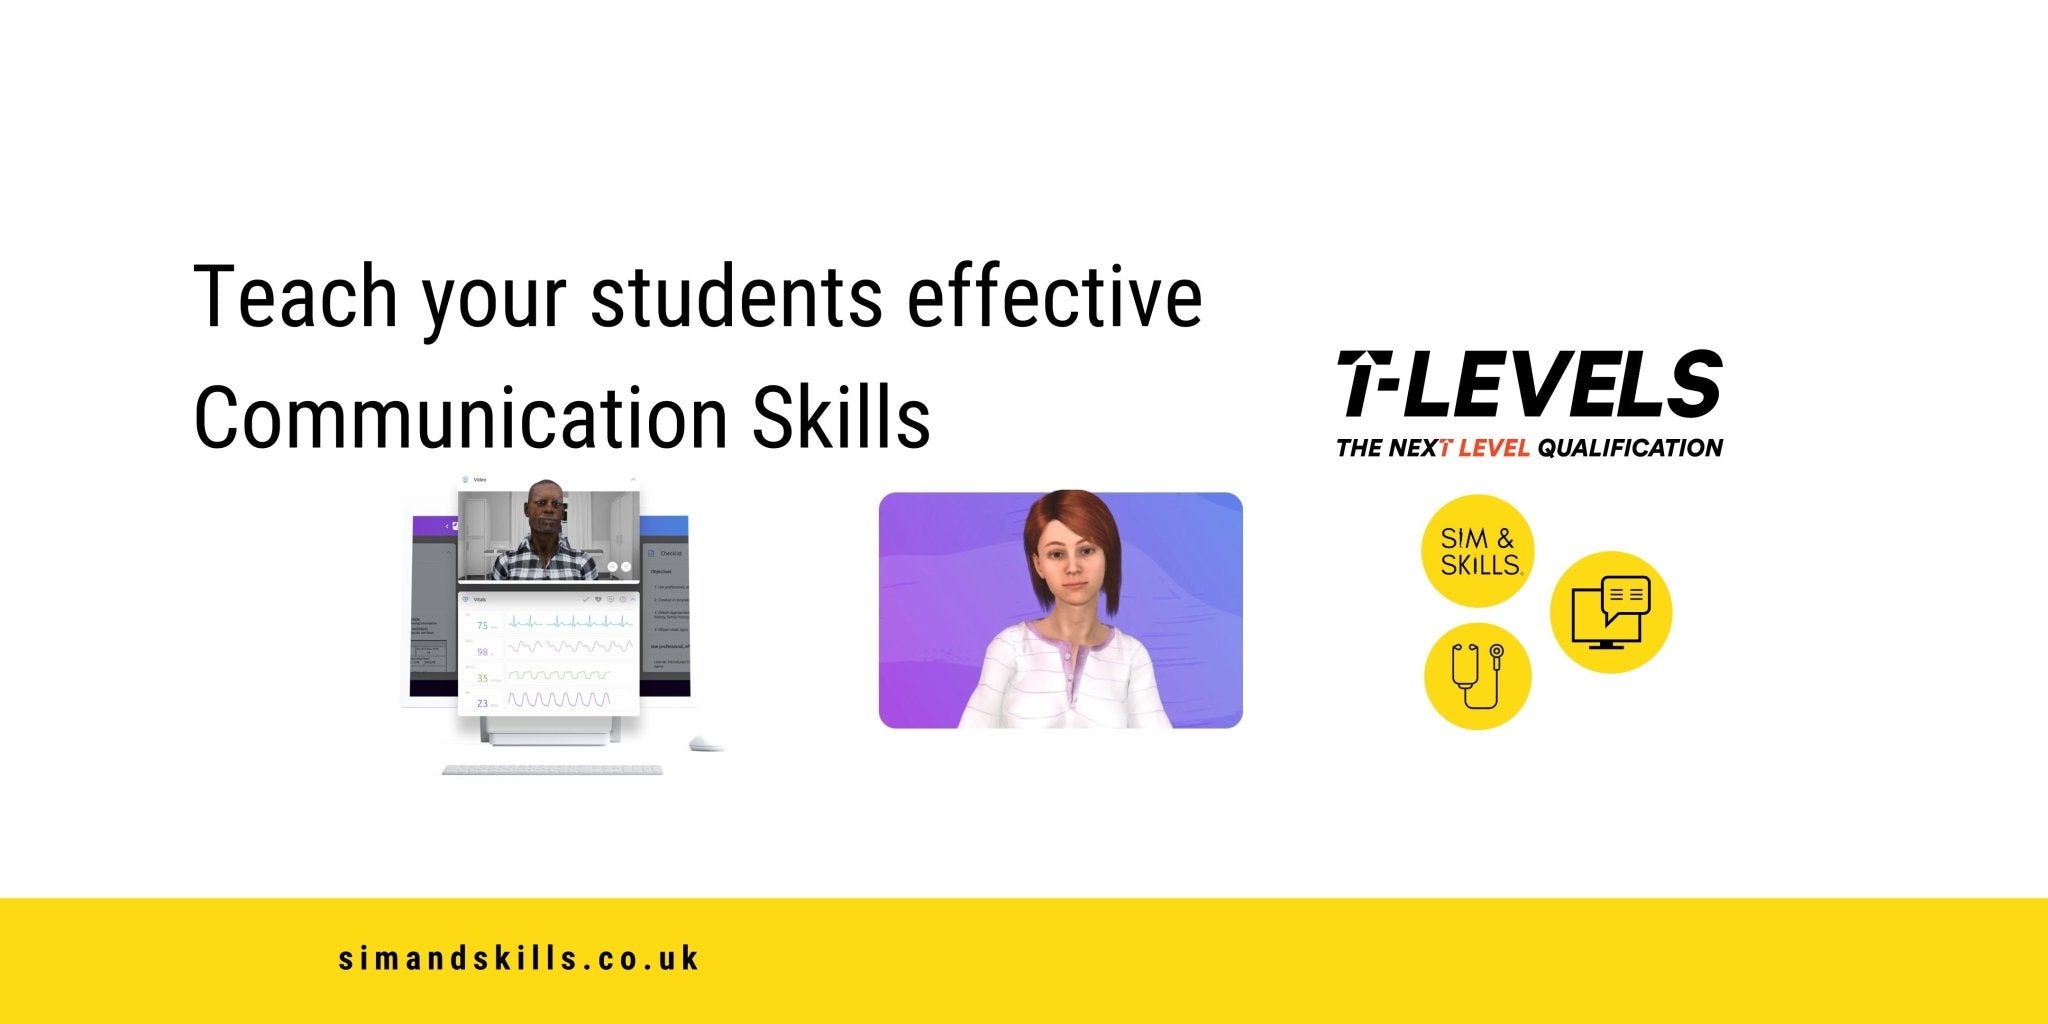 Teach your students effective communication skills with AI - Sim & Skills